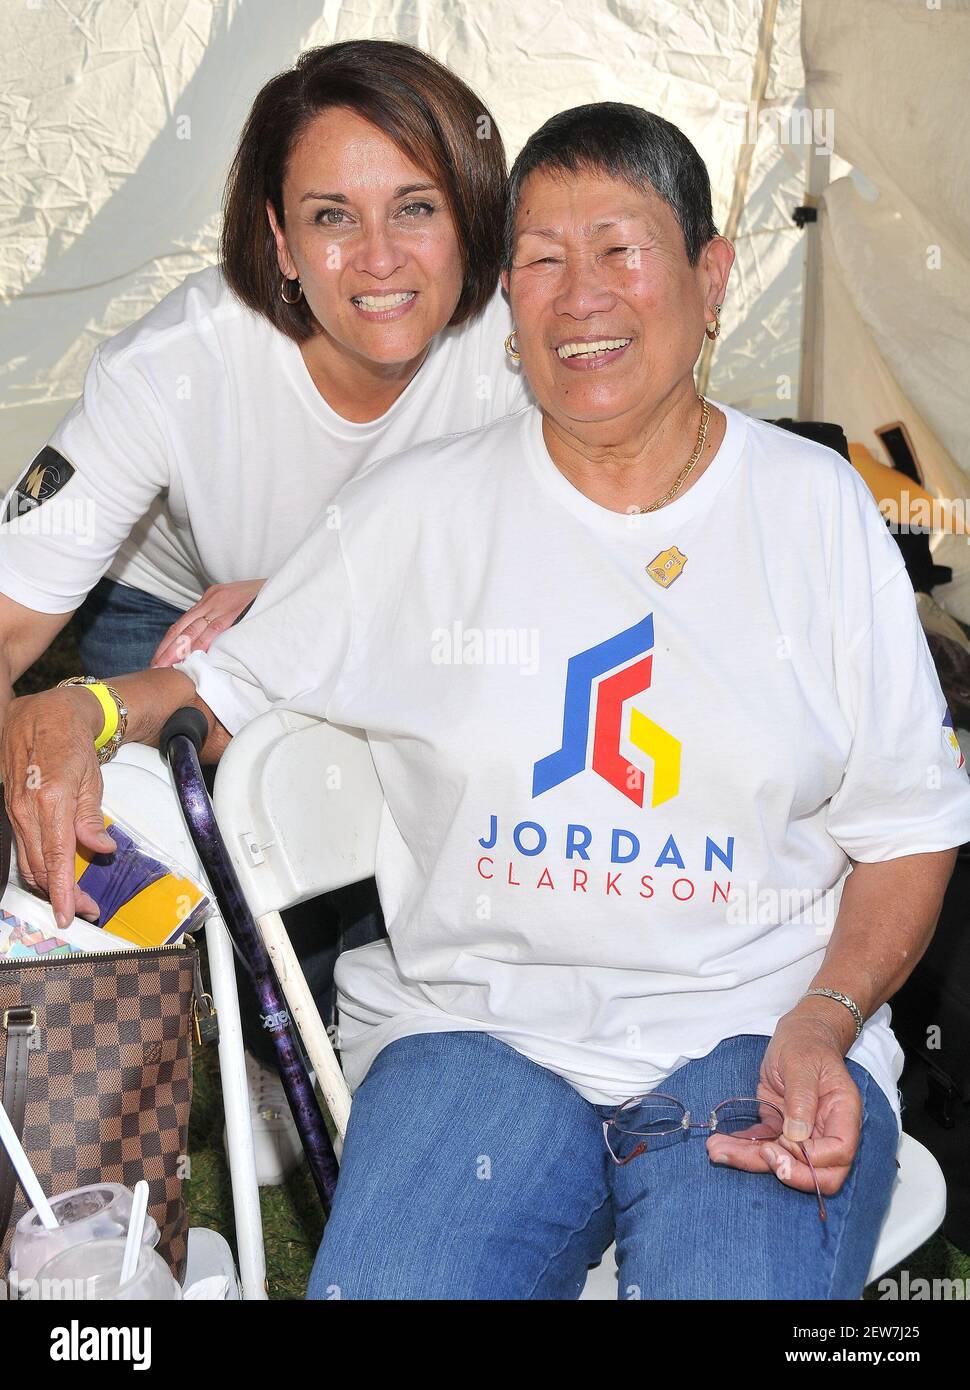 L-R) Jordan Clarkson of the LA Lakers Mother Annette Davis and Grandmother  at the 26th Festival of Philippine Arts and Culture (FPAC26) held at Echo  Park Lake in Los Angeles, CA on